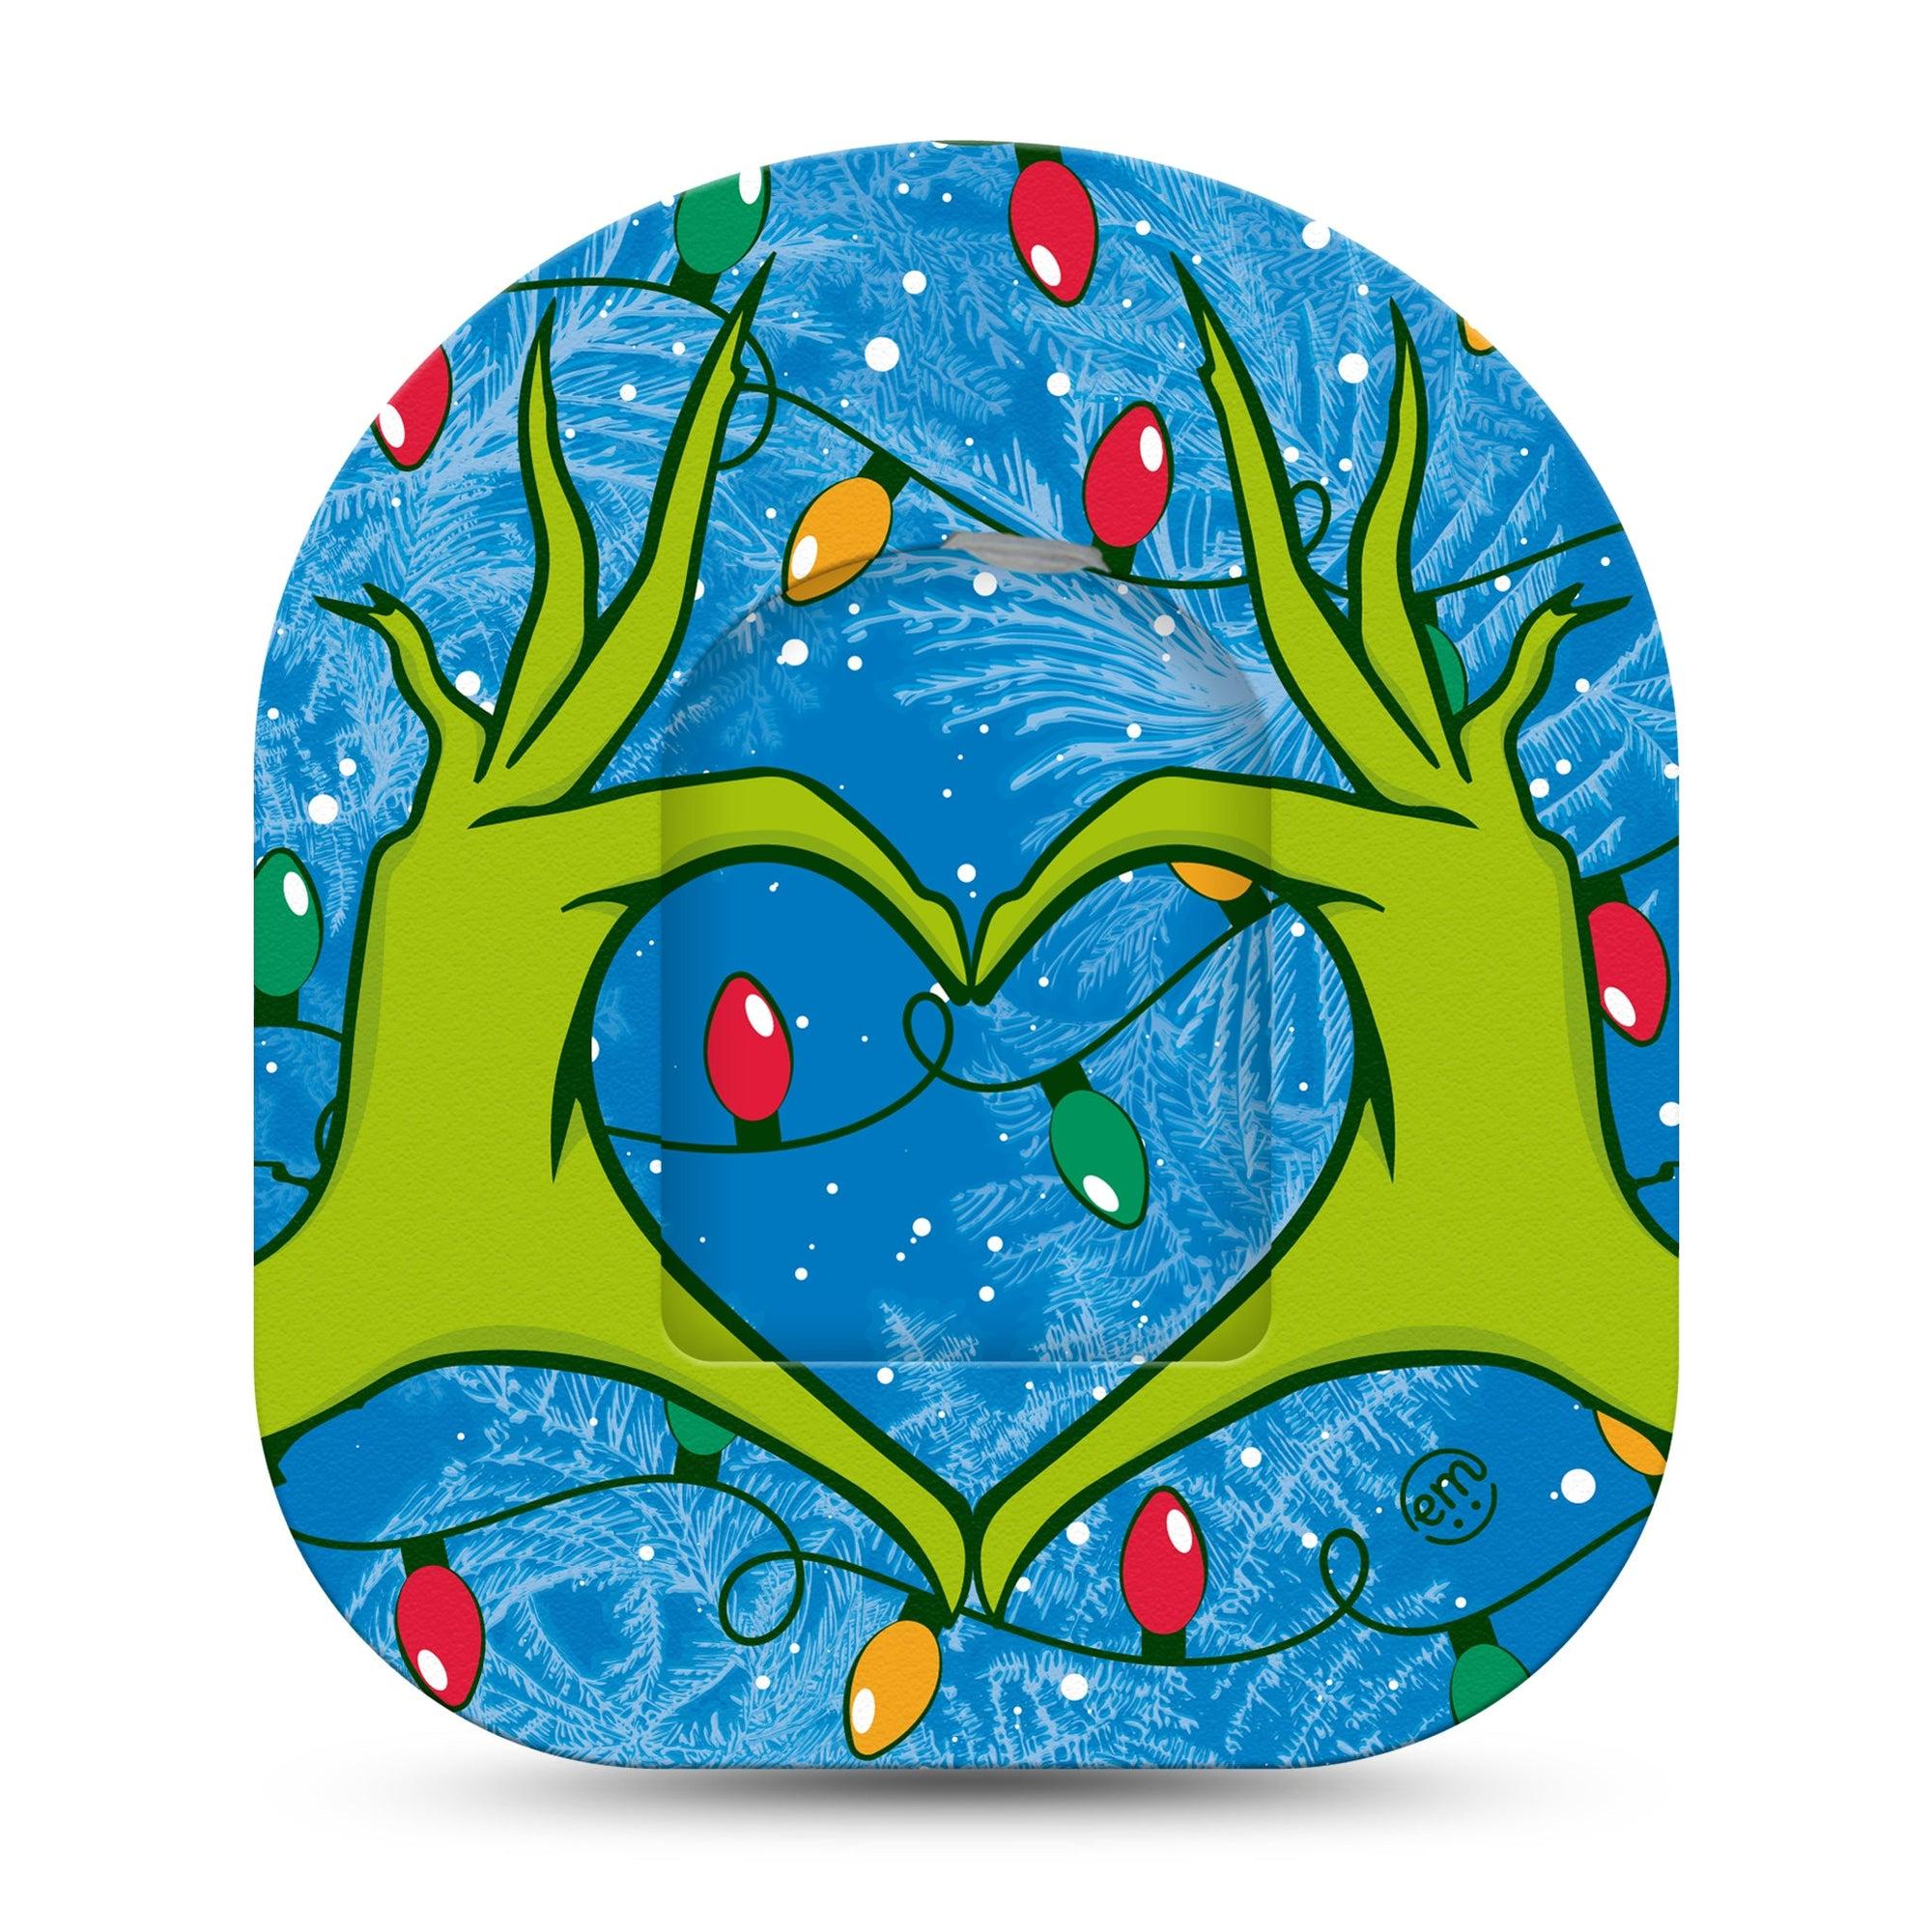 ExpressionMed Holiday Heart Hands Pod Sticker Fingers and Lights, Omnipod CGM Tape and Sticker Design